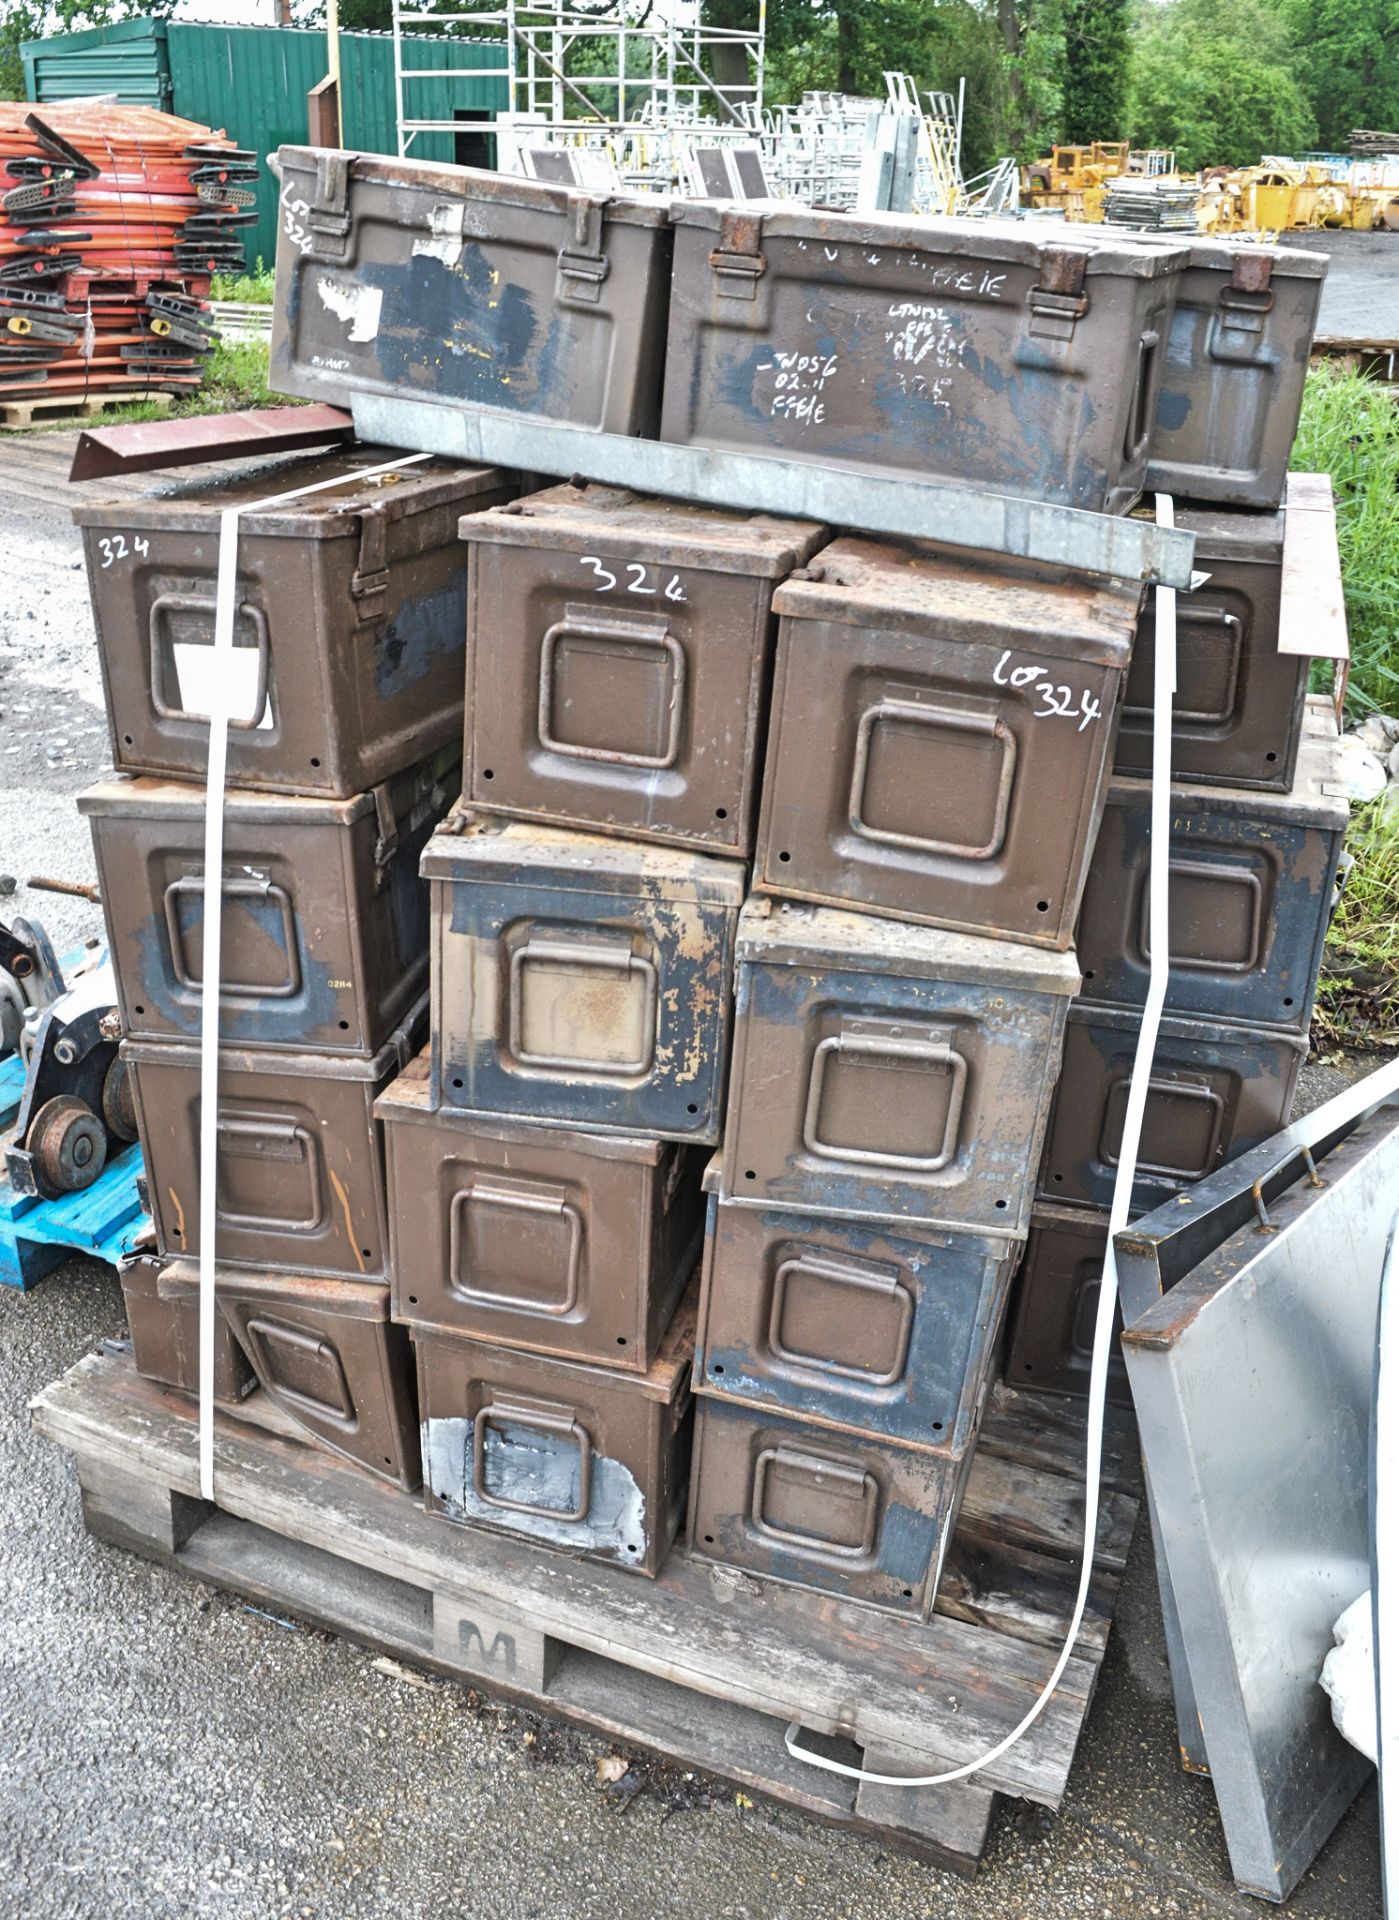 Pallet of approximately 30 ammunition boxes